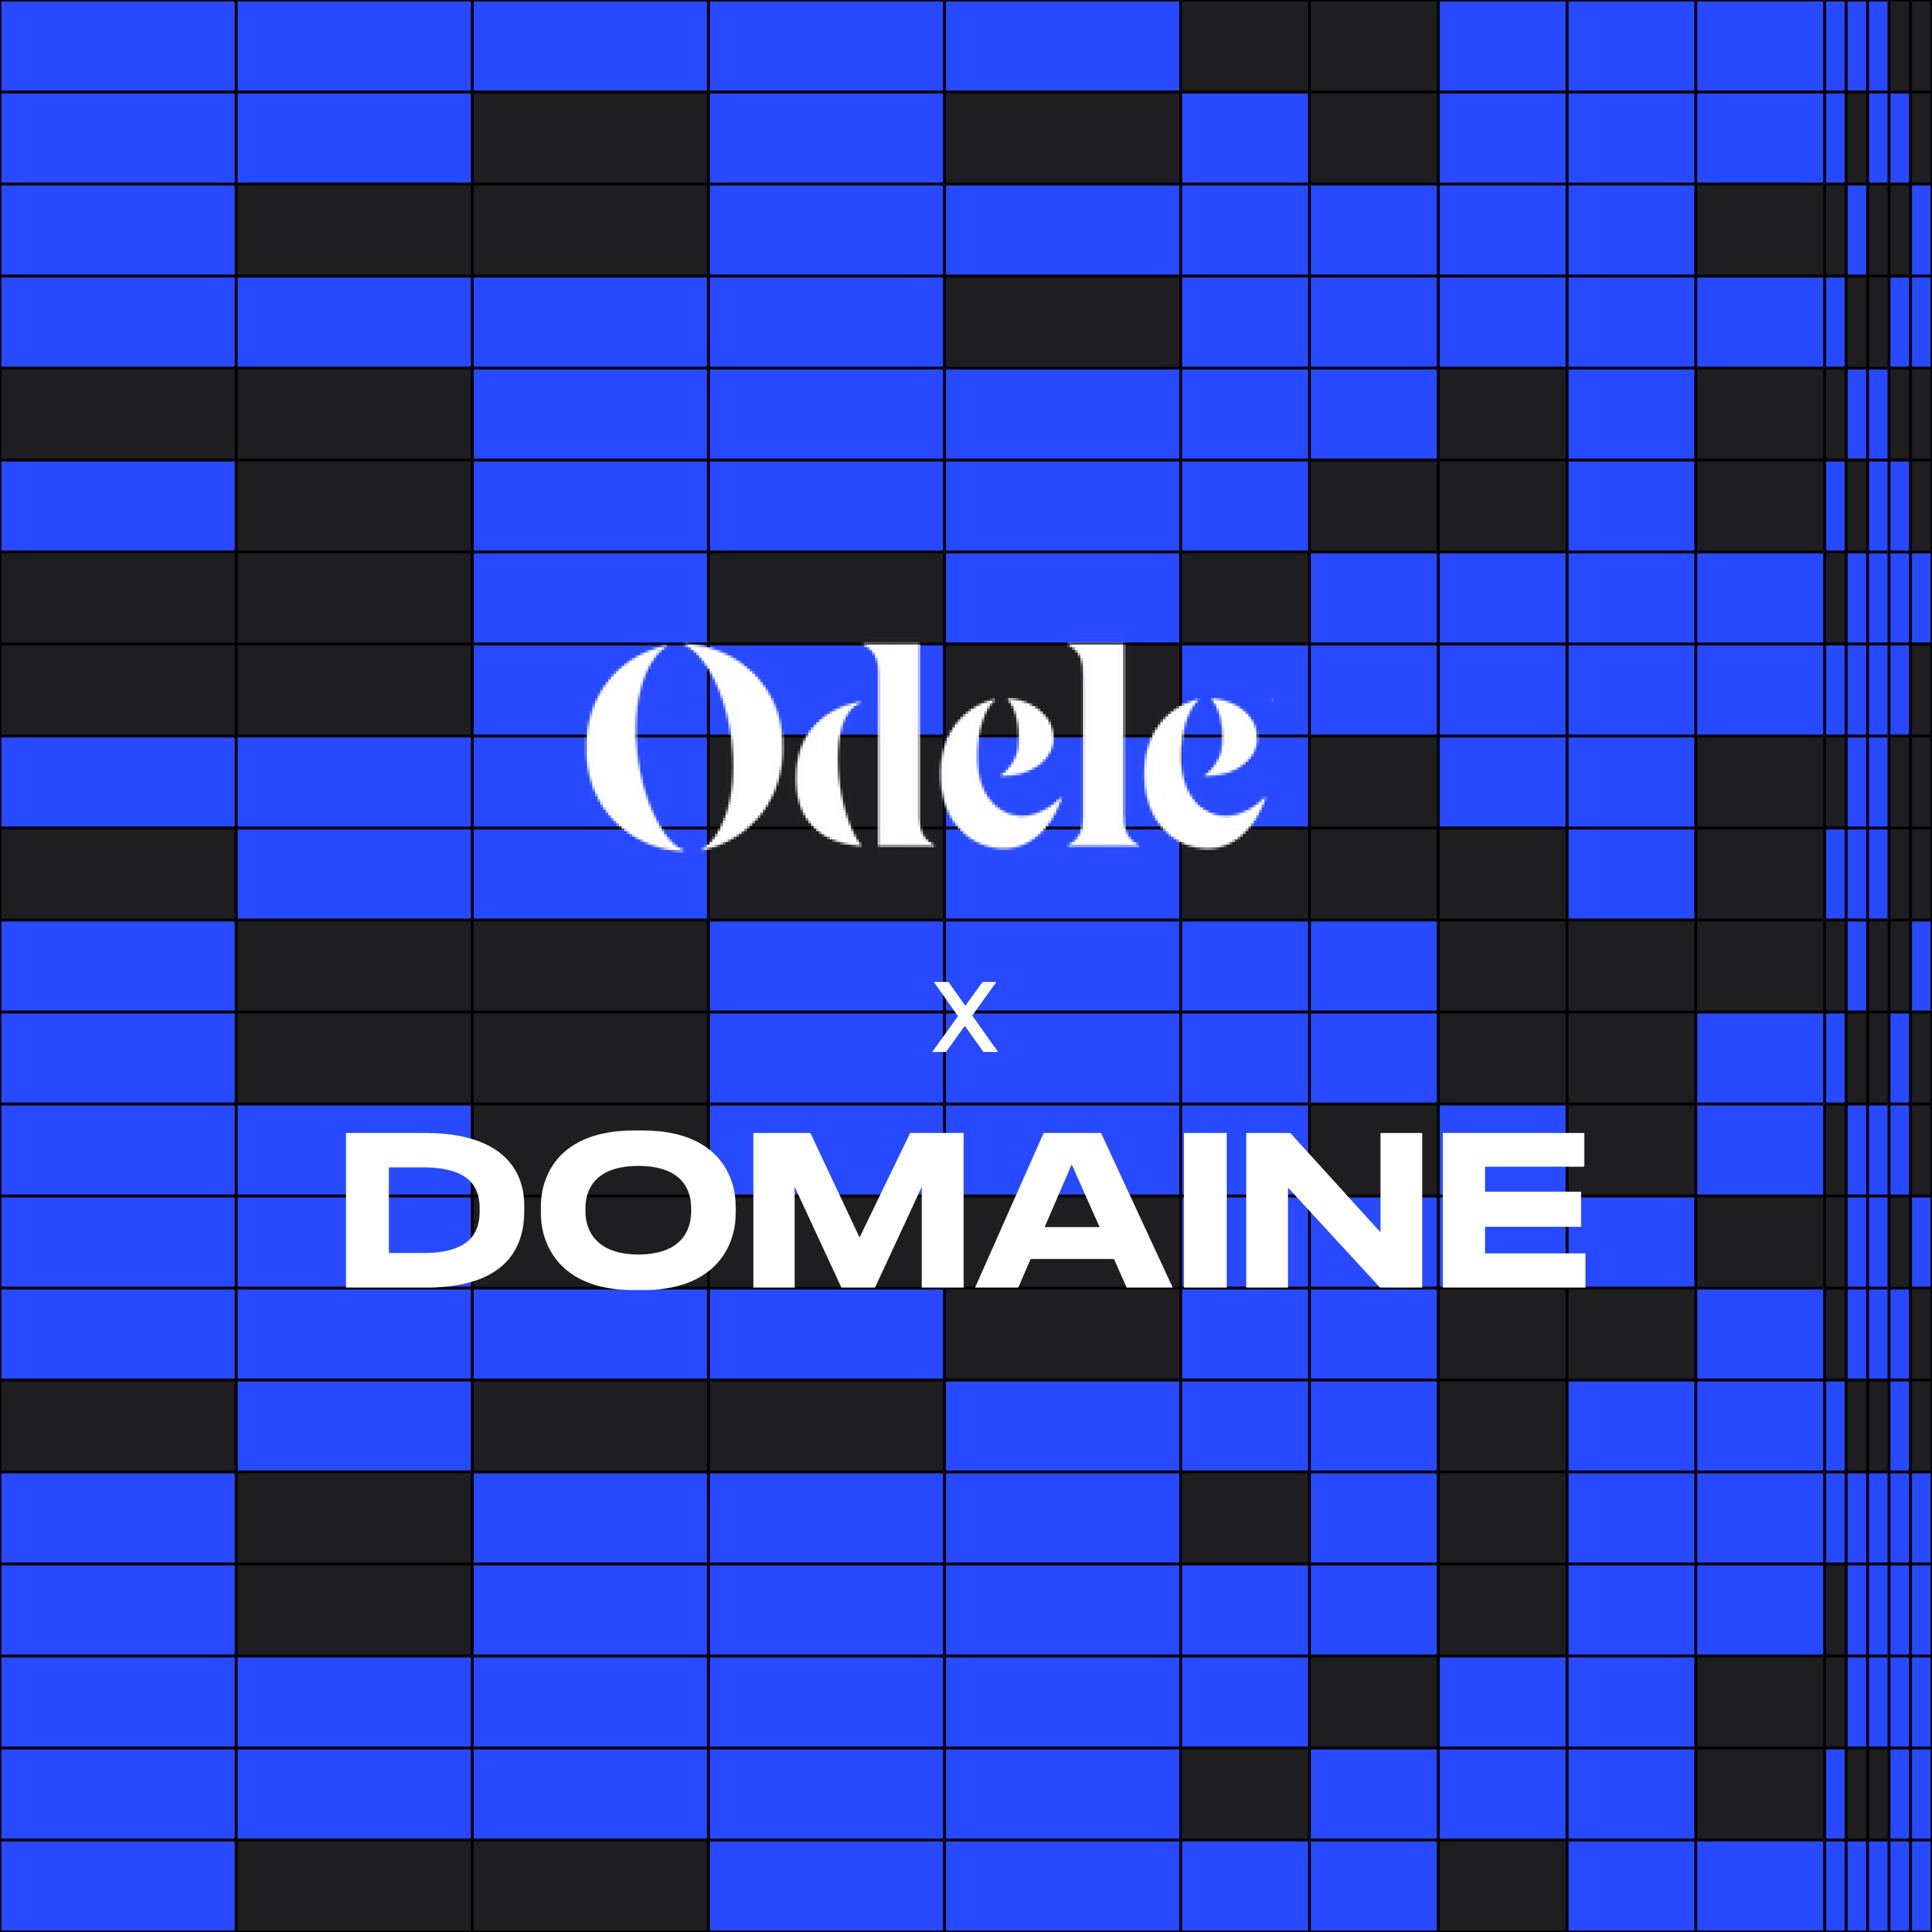 The Odele and Domaine logos on an abstract blue background.